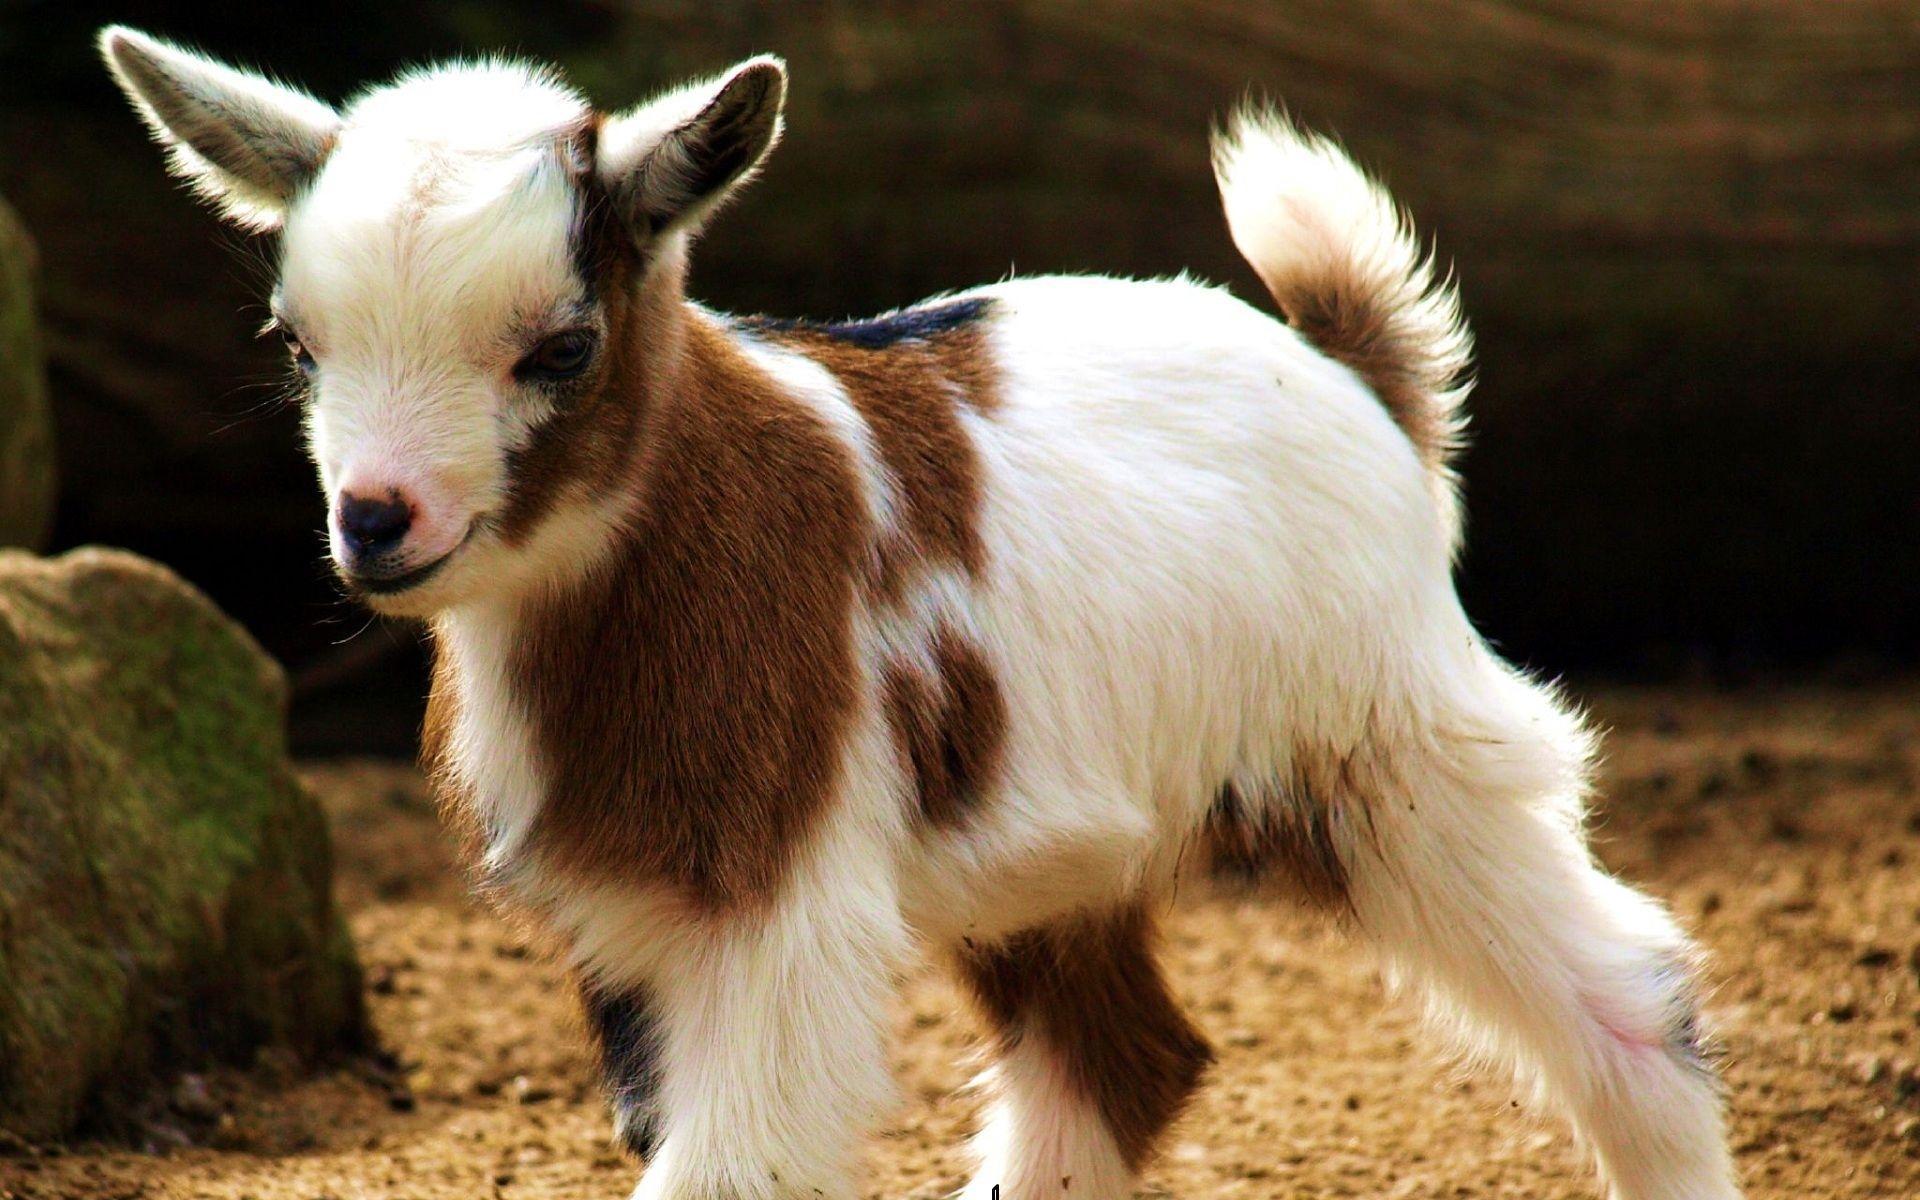 goat 1080P 2k 4k HD wallpapers backgrounds free download  Rare Gallery